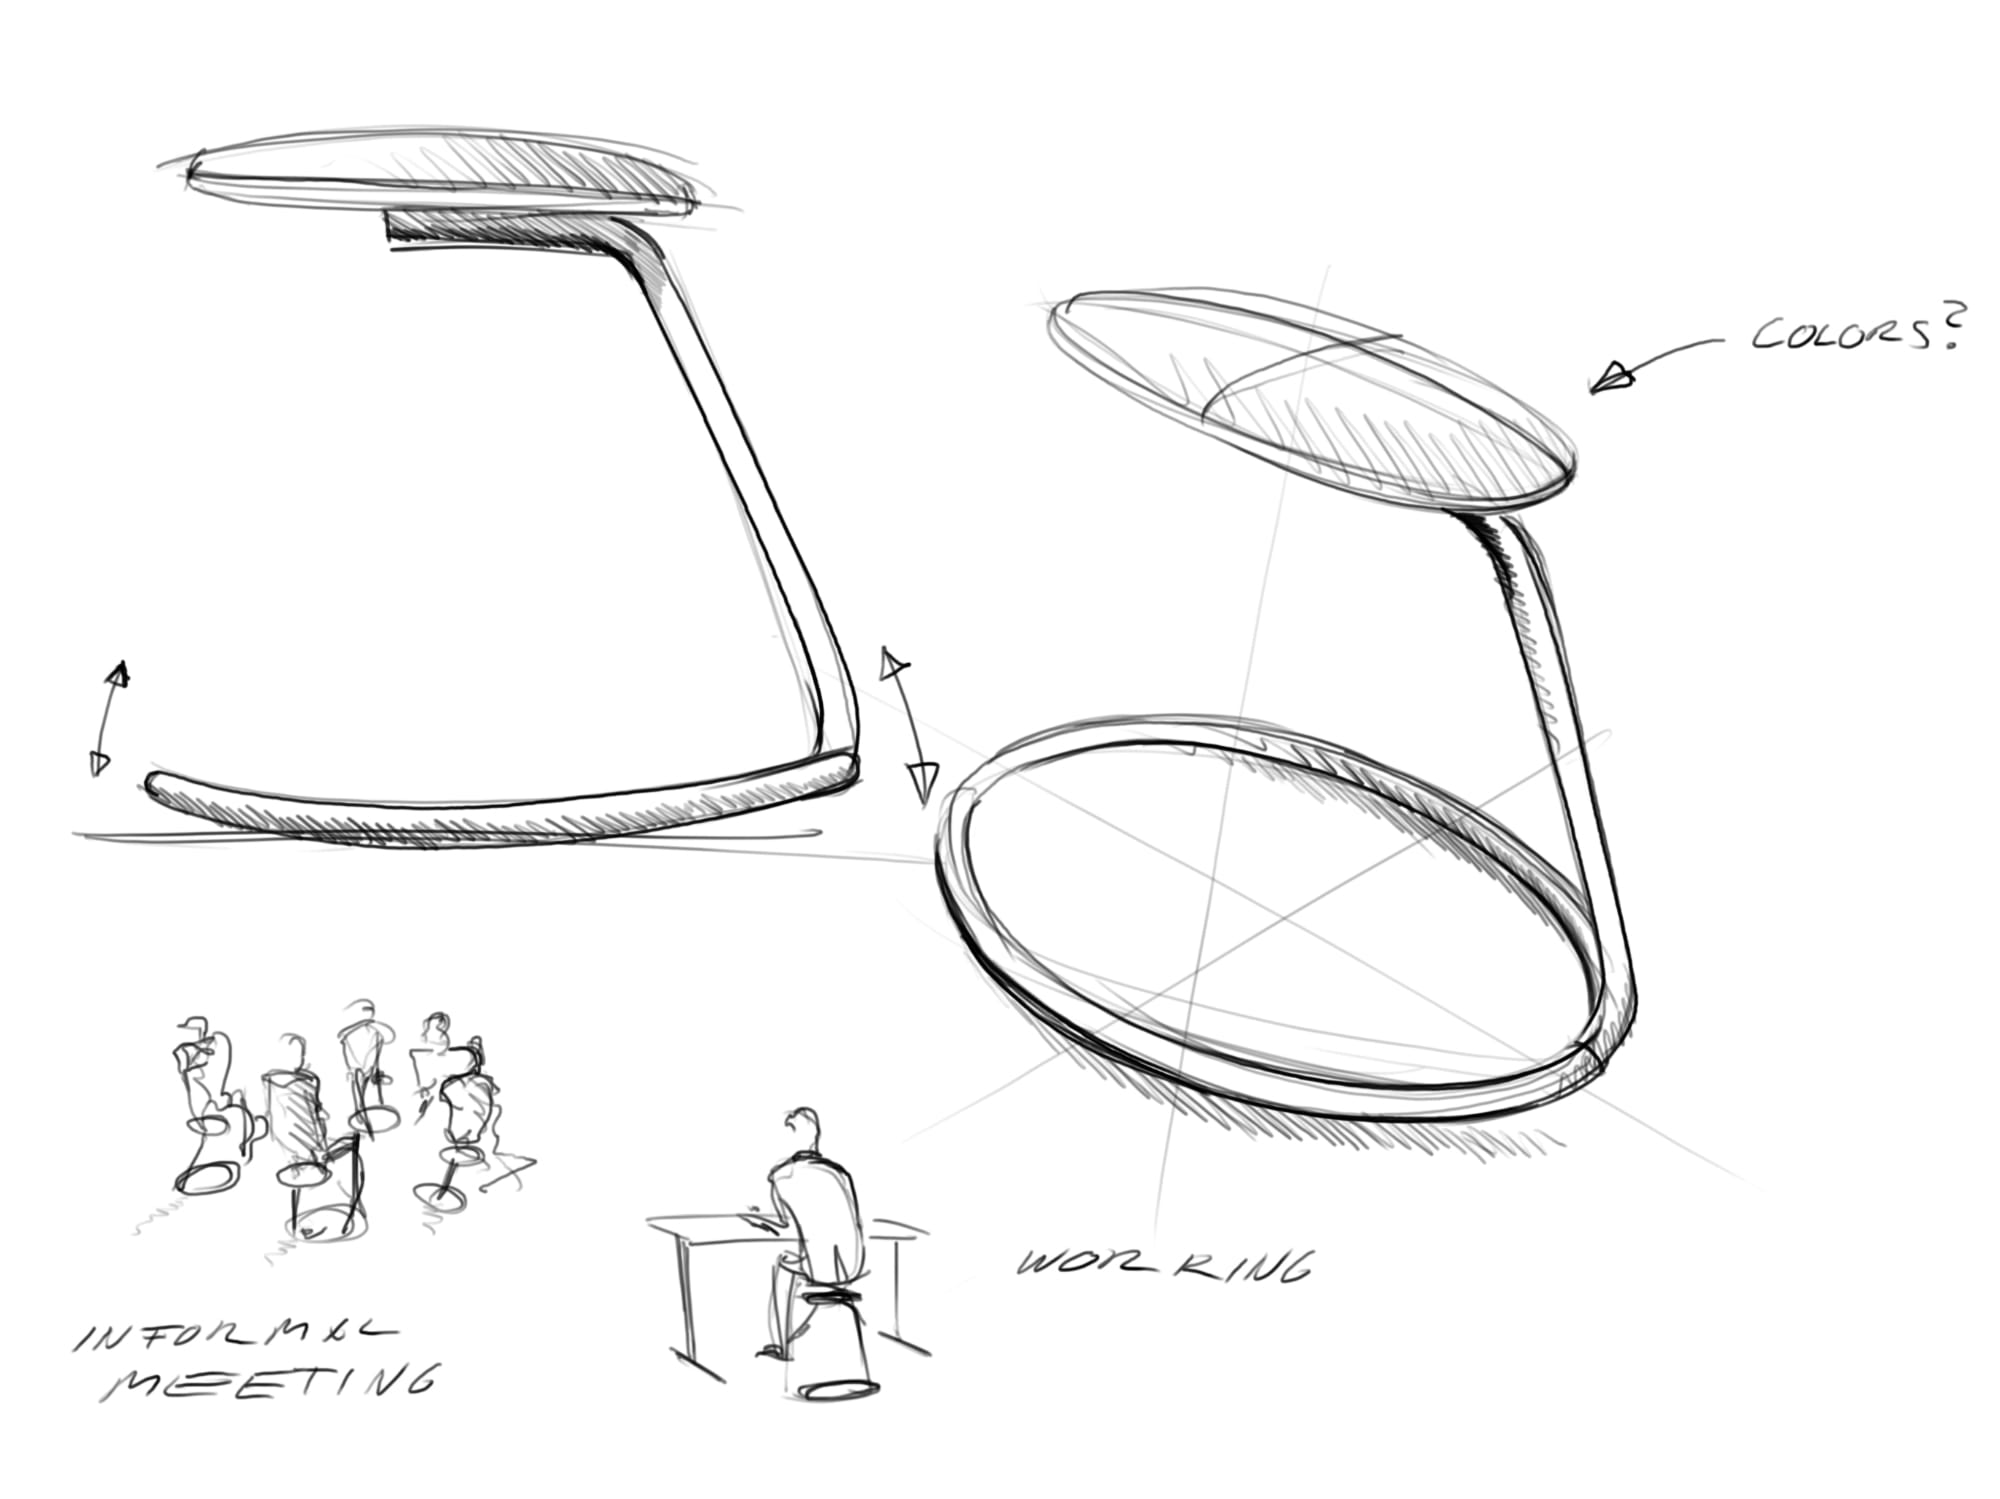 Sketch of Rocca stool with bent steel tube ring for ergonomic rocking that acts as a support leg and round seat cushion